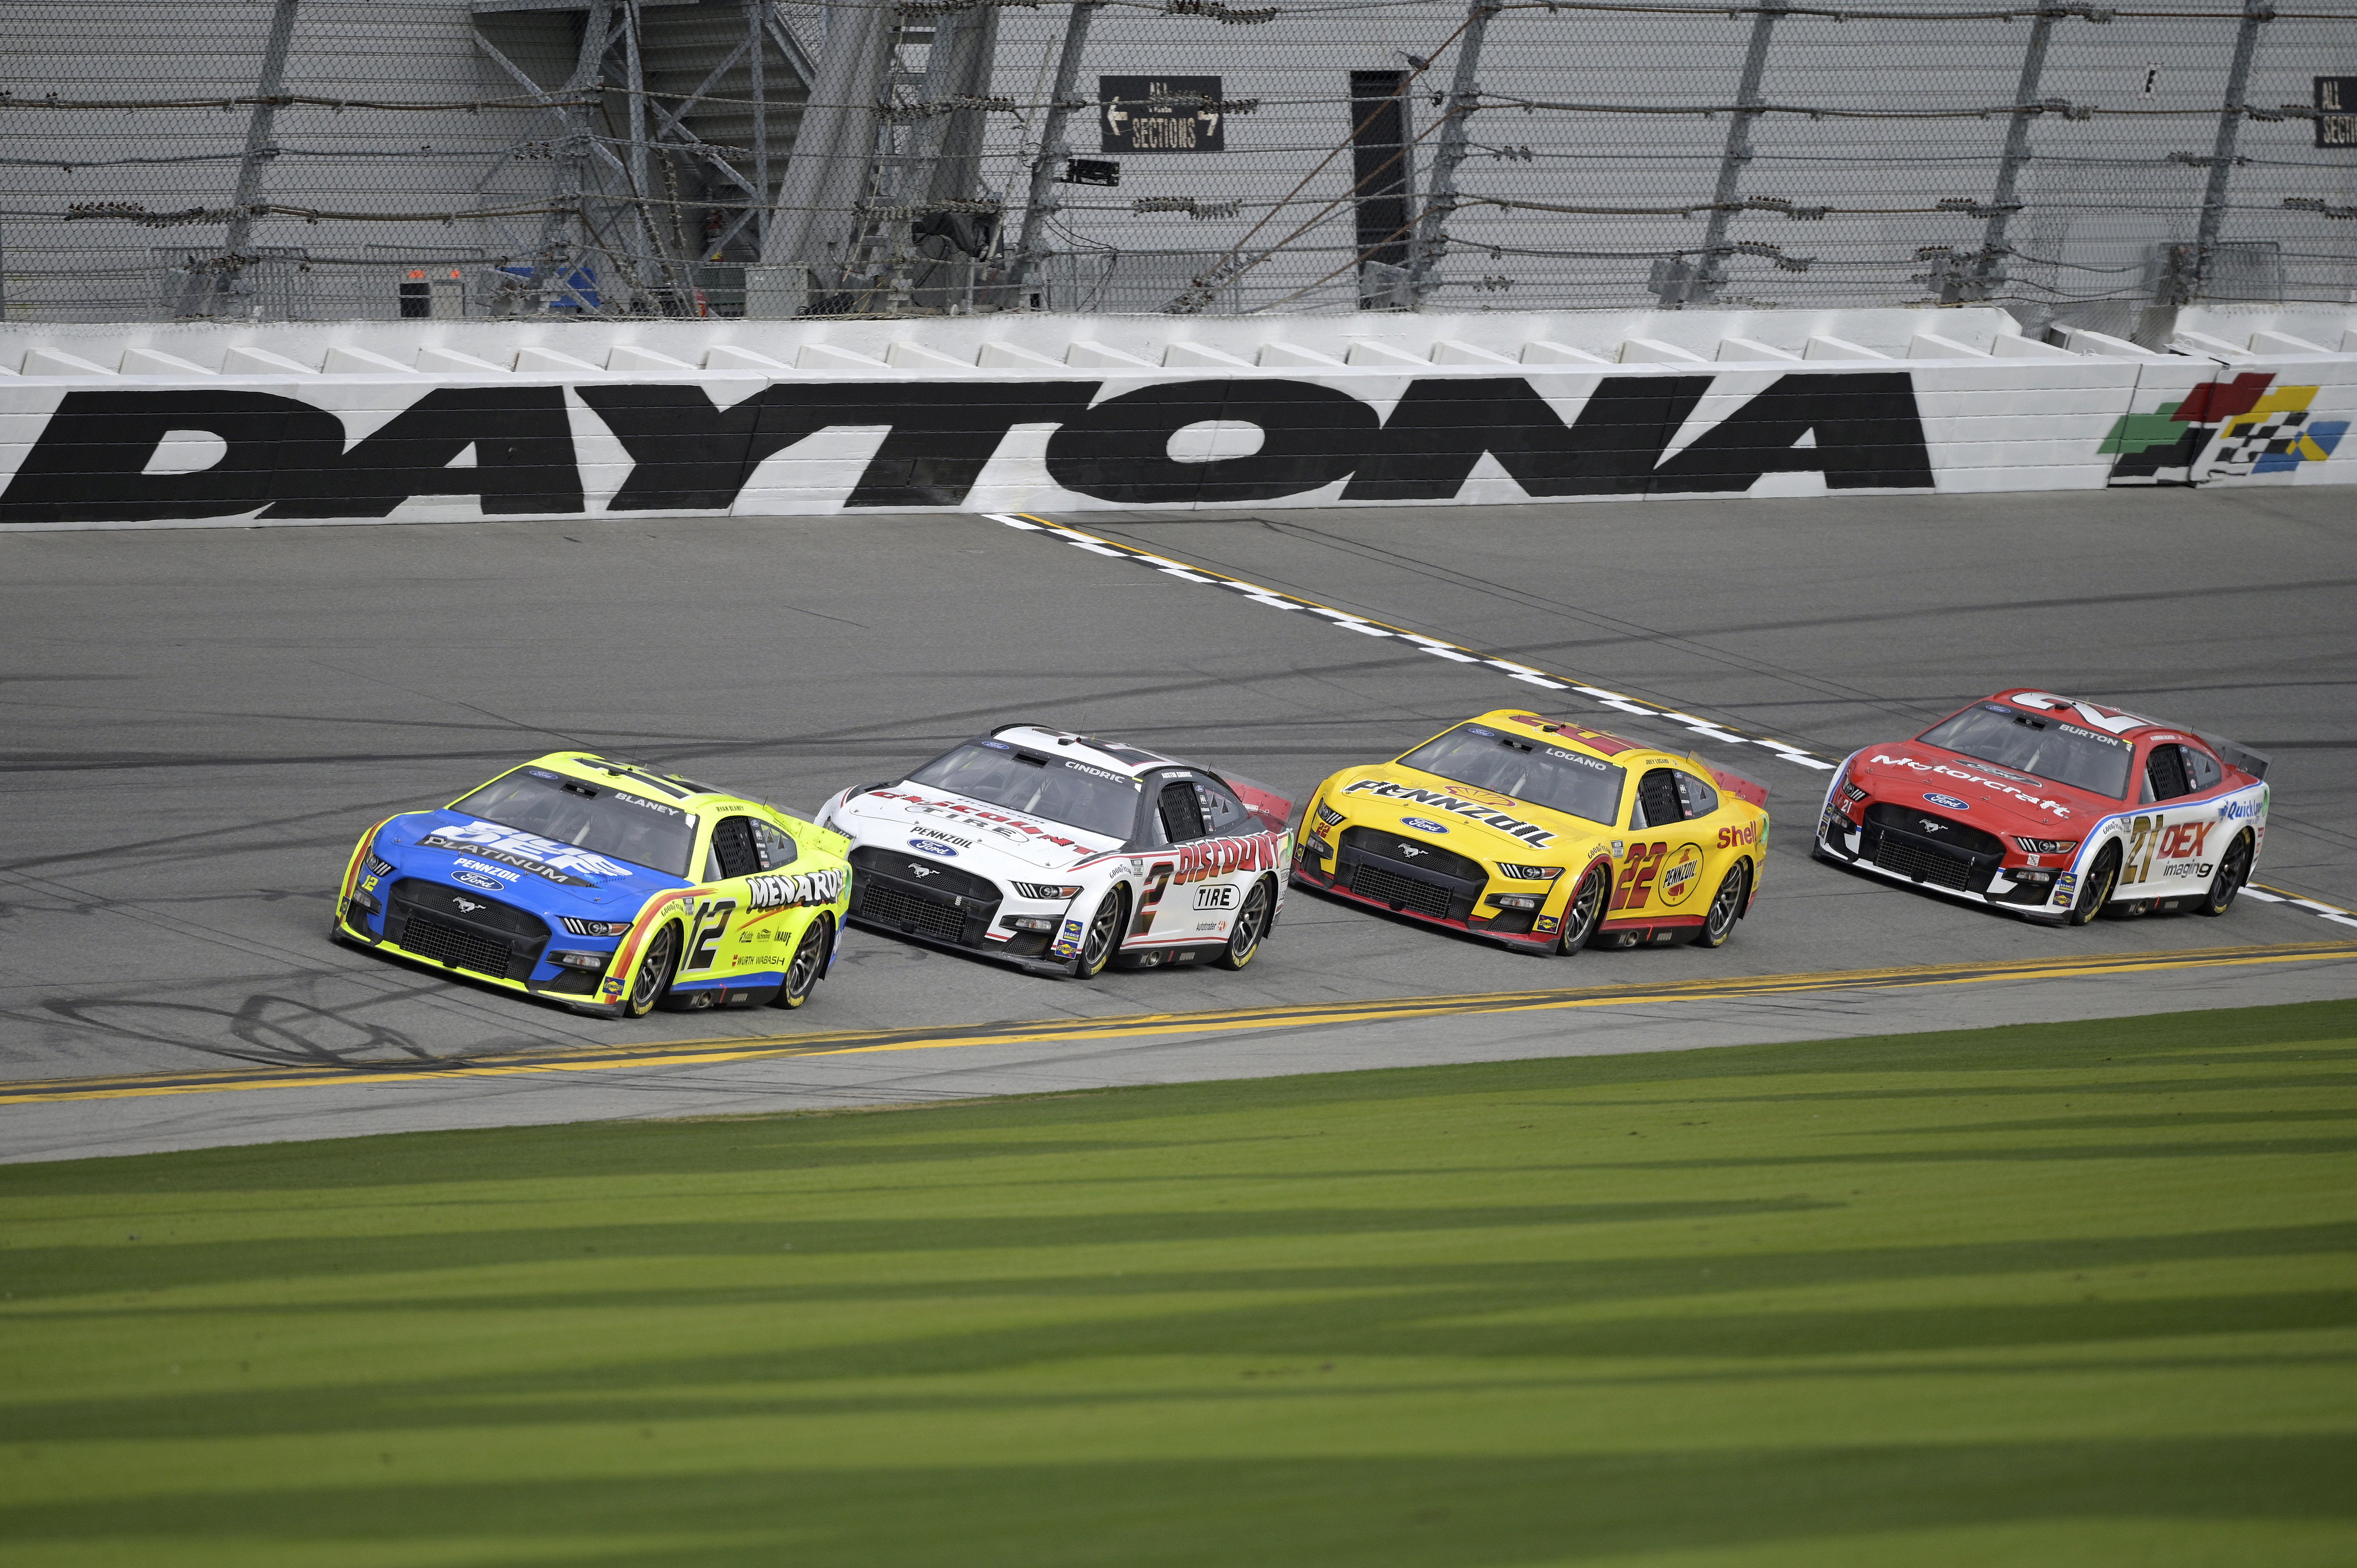 Daytona 500 FREE LIVE STREAM (2/20/22) Watch NASCAR Cup Series online Time, TV, channel